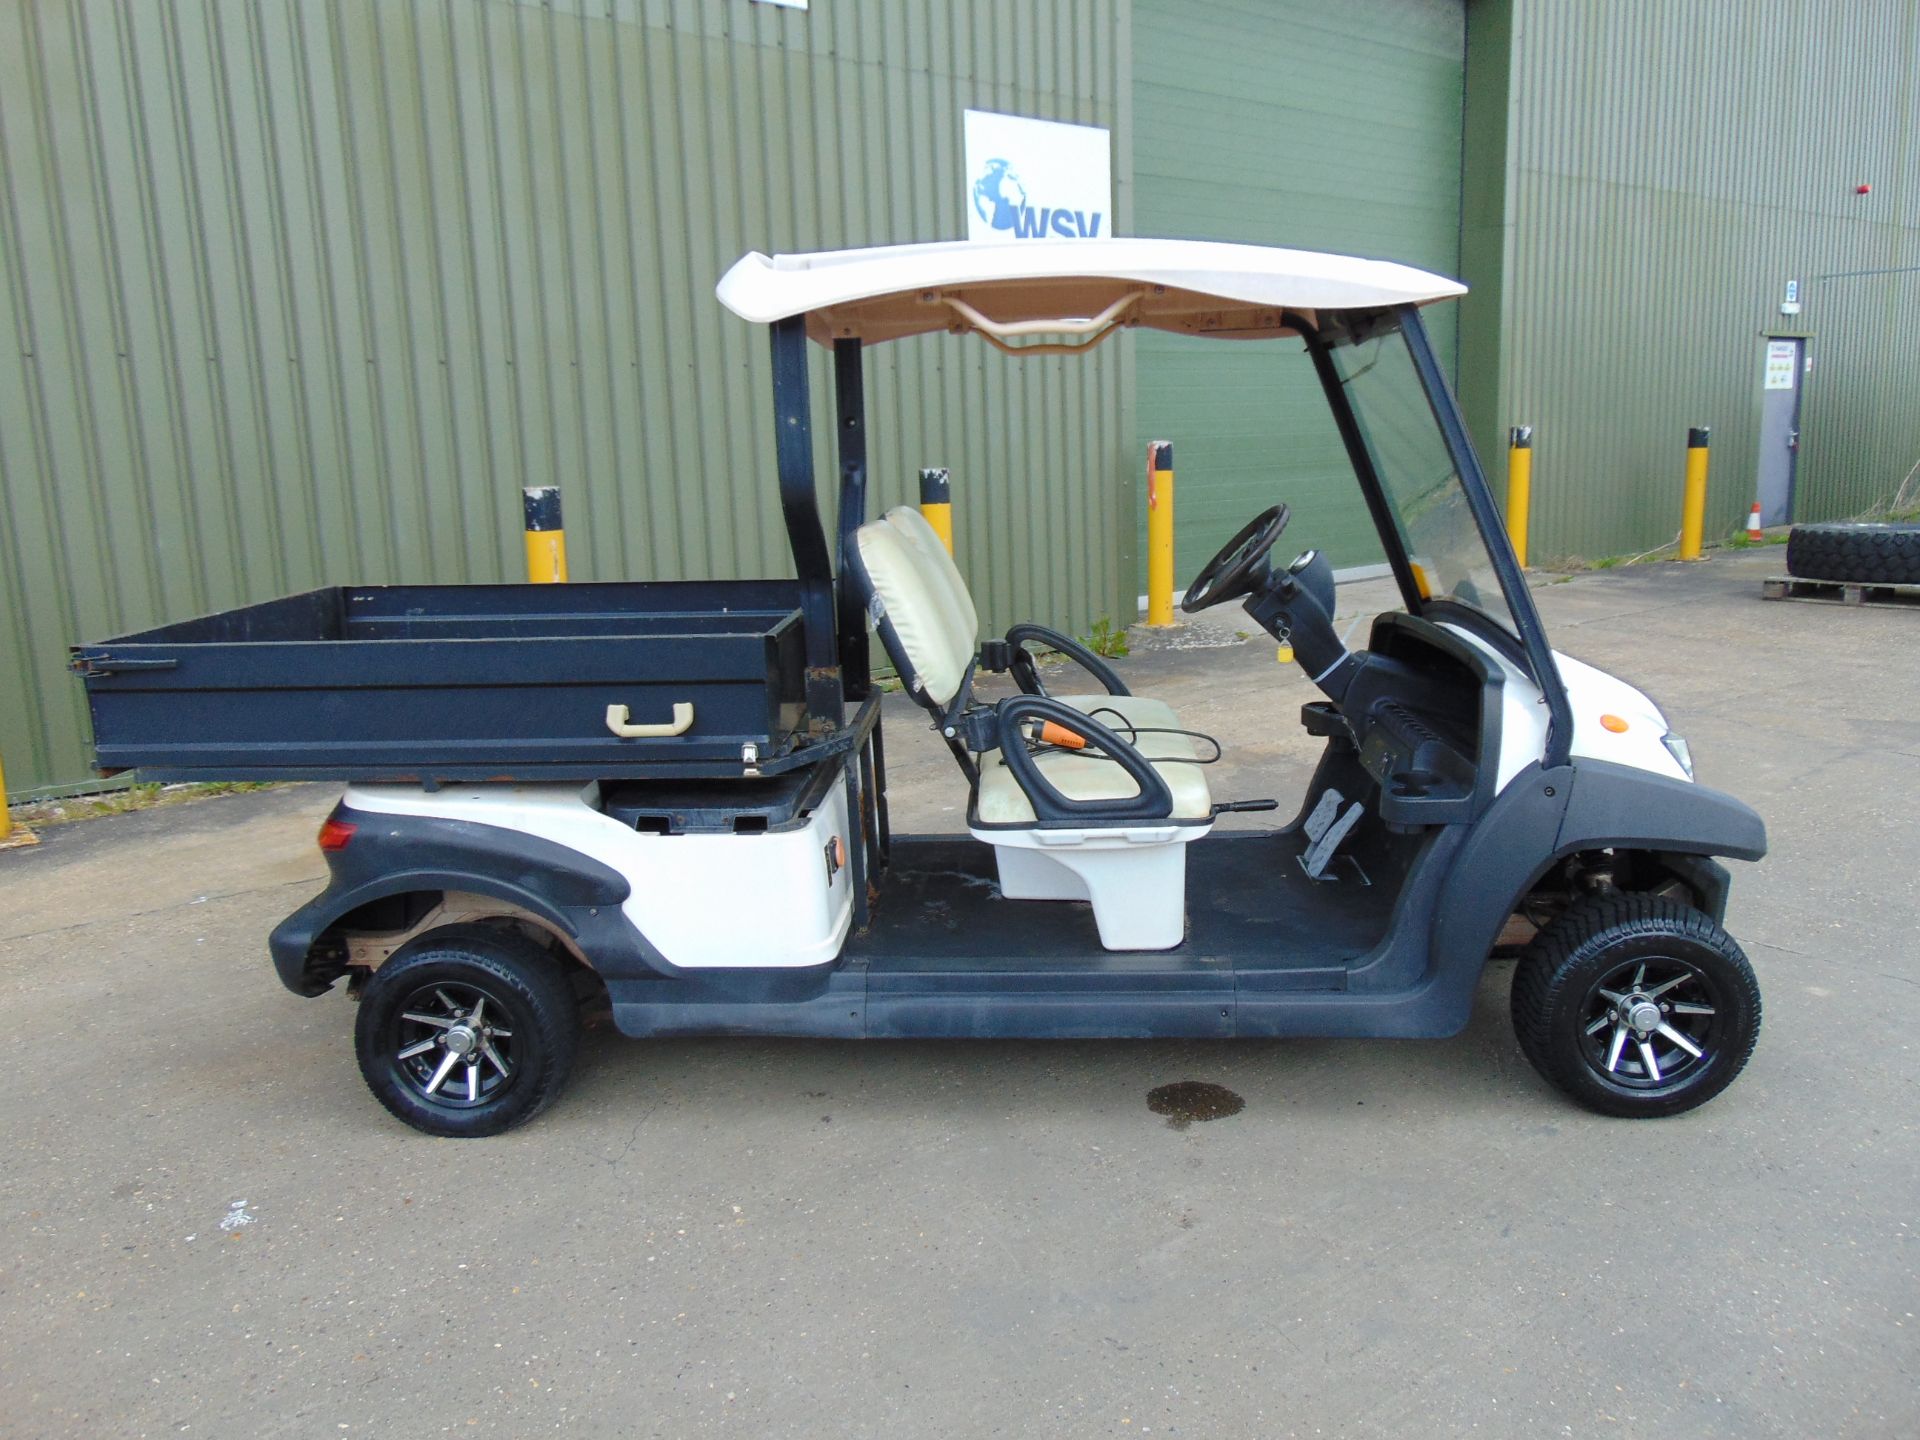 Eagle 2 Seat Electric Utility Vehicle c/w Rear Tipping Body - Image 6 of 18